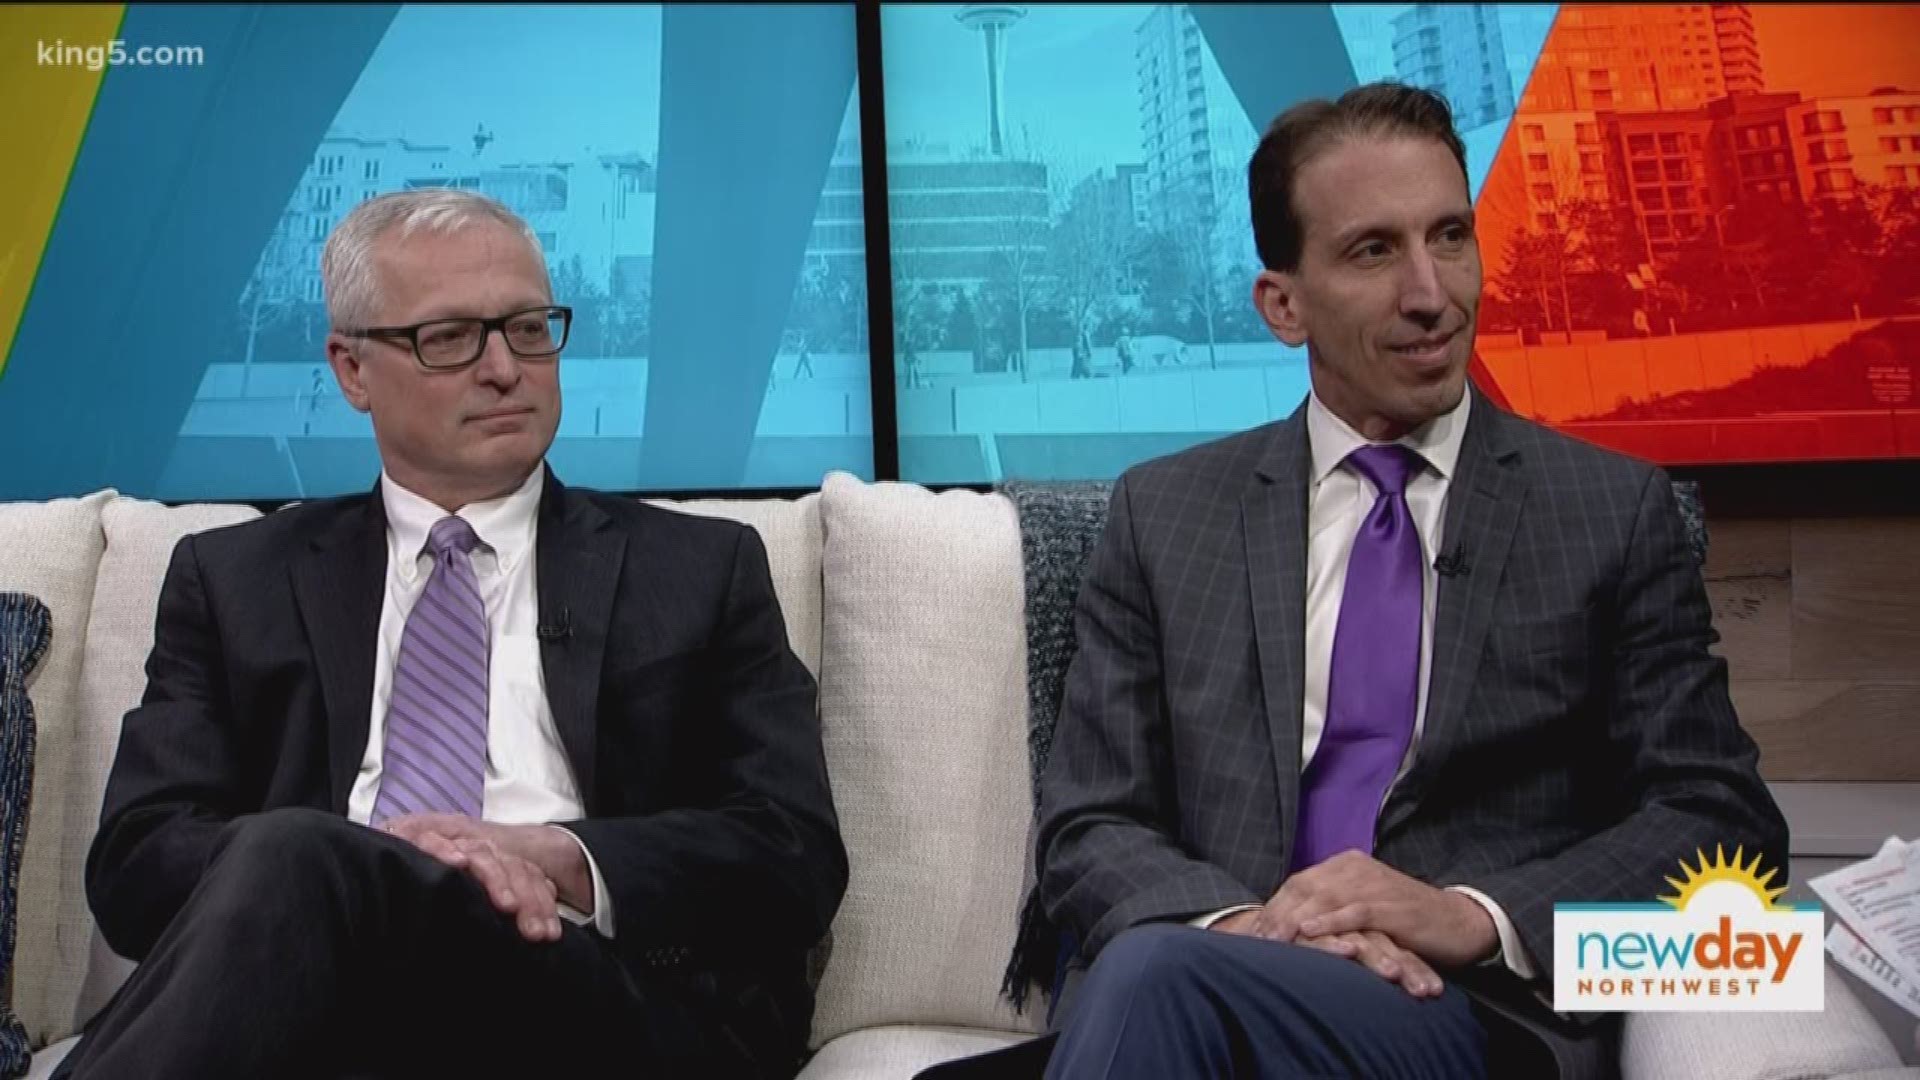 Dr. John Espinola and Dr. David Carlson talk about the benefits of Peak Care. This segment is sponsored by Premera Blue Cross.